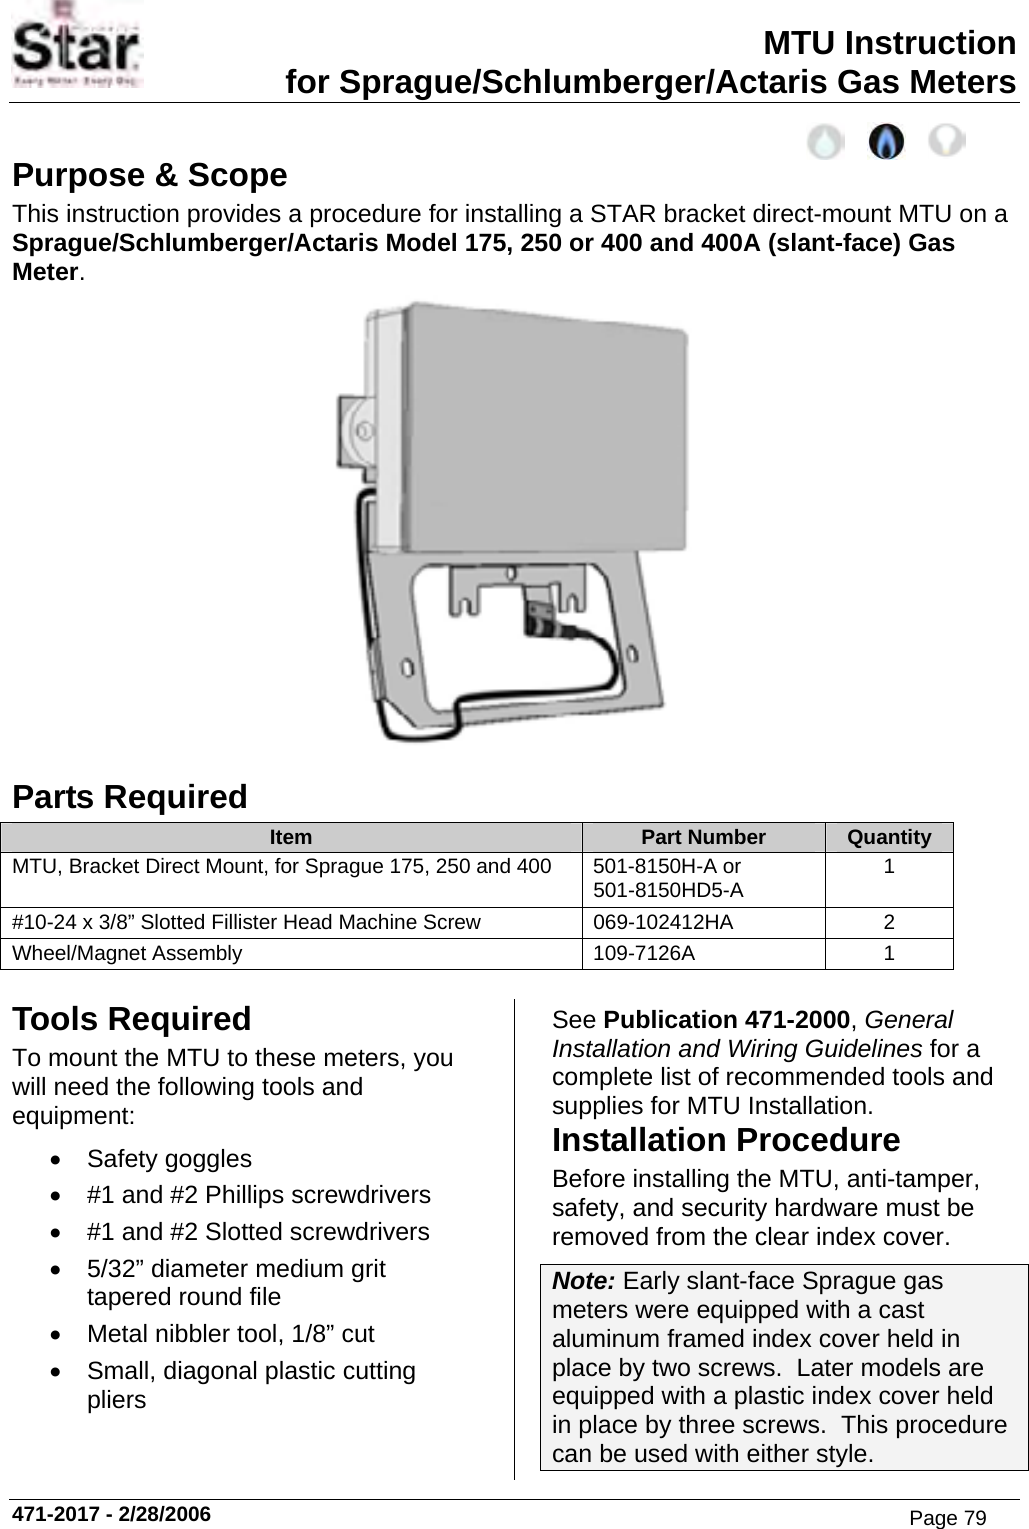 MTU Instruction for Sprague/Schlumberger/Actaris Gas Meters Purpose &amp; Scope This instruction provides a procedure for installing a STAR bracket direct-mount MTU on a Sprague/Schlumberger/Actaris Model 175, 250 or 400 and 400A (slant-face) Gas Meter.  Parts Required Item  Part Number  Quantity MTU, Bracket Direct Mount, for Sprague 175, 250 and 400  501-8150H-A or 501-8150HD5-A  1 #10-24 x 3/8” Slotted Fillister Head Machine Screw  069-102412HA  2 Wheel/Magnet Assembly  109-7126A  1  Tools Required To mount the MTU to these meters, you will need the following tools and equipment: • Safety goggles •  #1 and #2 Phillips screwdrivers •  #1 and #2 Slotted screwdrivers •  5/32” diameter medium grit tapered round file •  Metal nibbler tool, 1/8” cut •  Small, diagonal plastic cutting pliers See Publication 471-2000, General Installation and Wiring Guidelines for a complete list of recommended tools and supplies for MTU Installation. Installation Procedure Before installing the MTU, anti-tamper, safety, and security hardware must be removed from the clear index cover. Note: Early slant-face Sprague gas meters were equipped with a cast aluminum framed index cover held in place by two screws.  Later models are equipped with a plastic index cover held in place by three screws.  This procedure can be used with either style. 471-2017 - 2/28/2006 Page 79